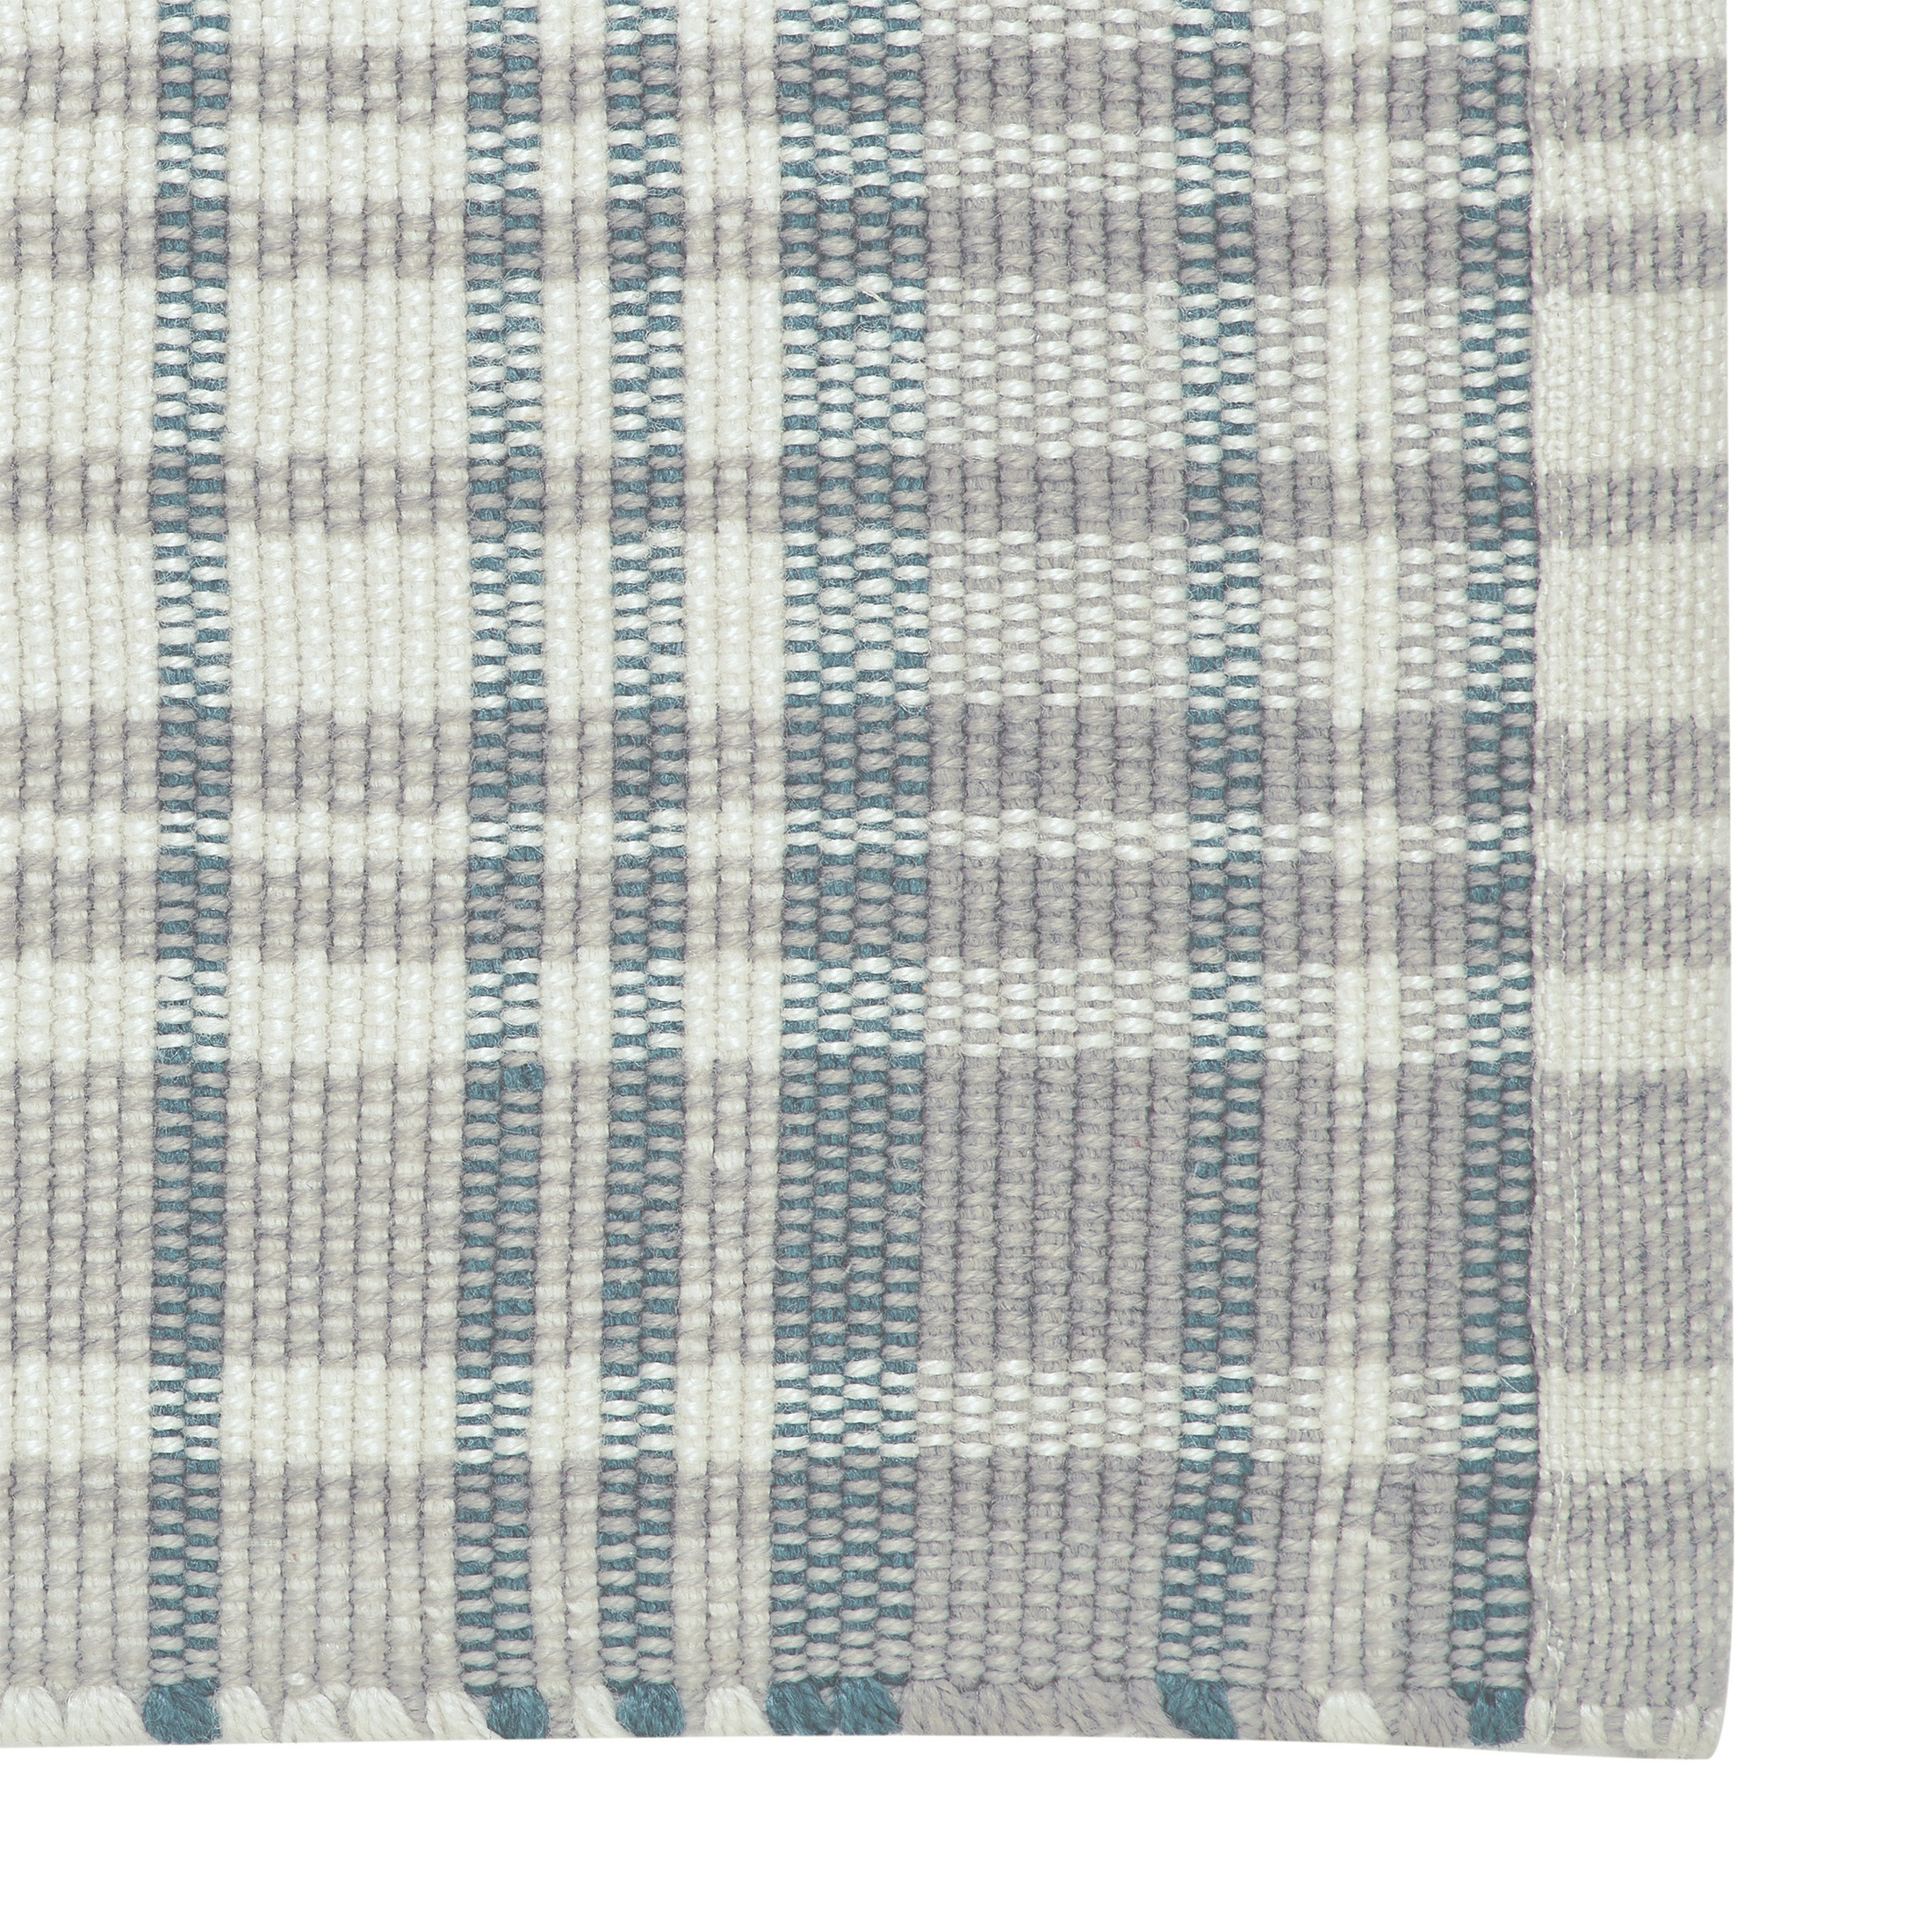 My Texas House Grey Plaid Layering Polyester Indoor/Outdoor Area Rug, 24" x 36" - image 4 of 7